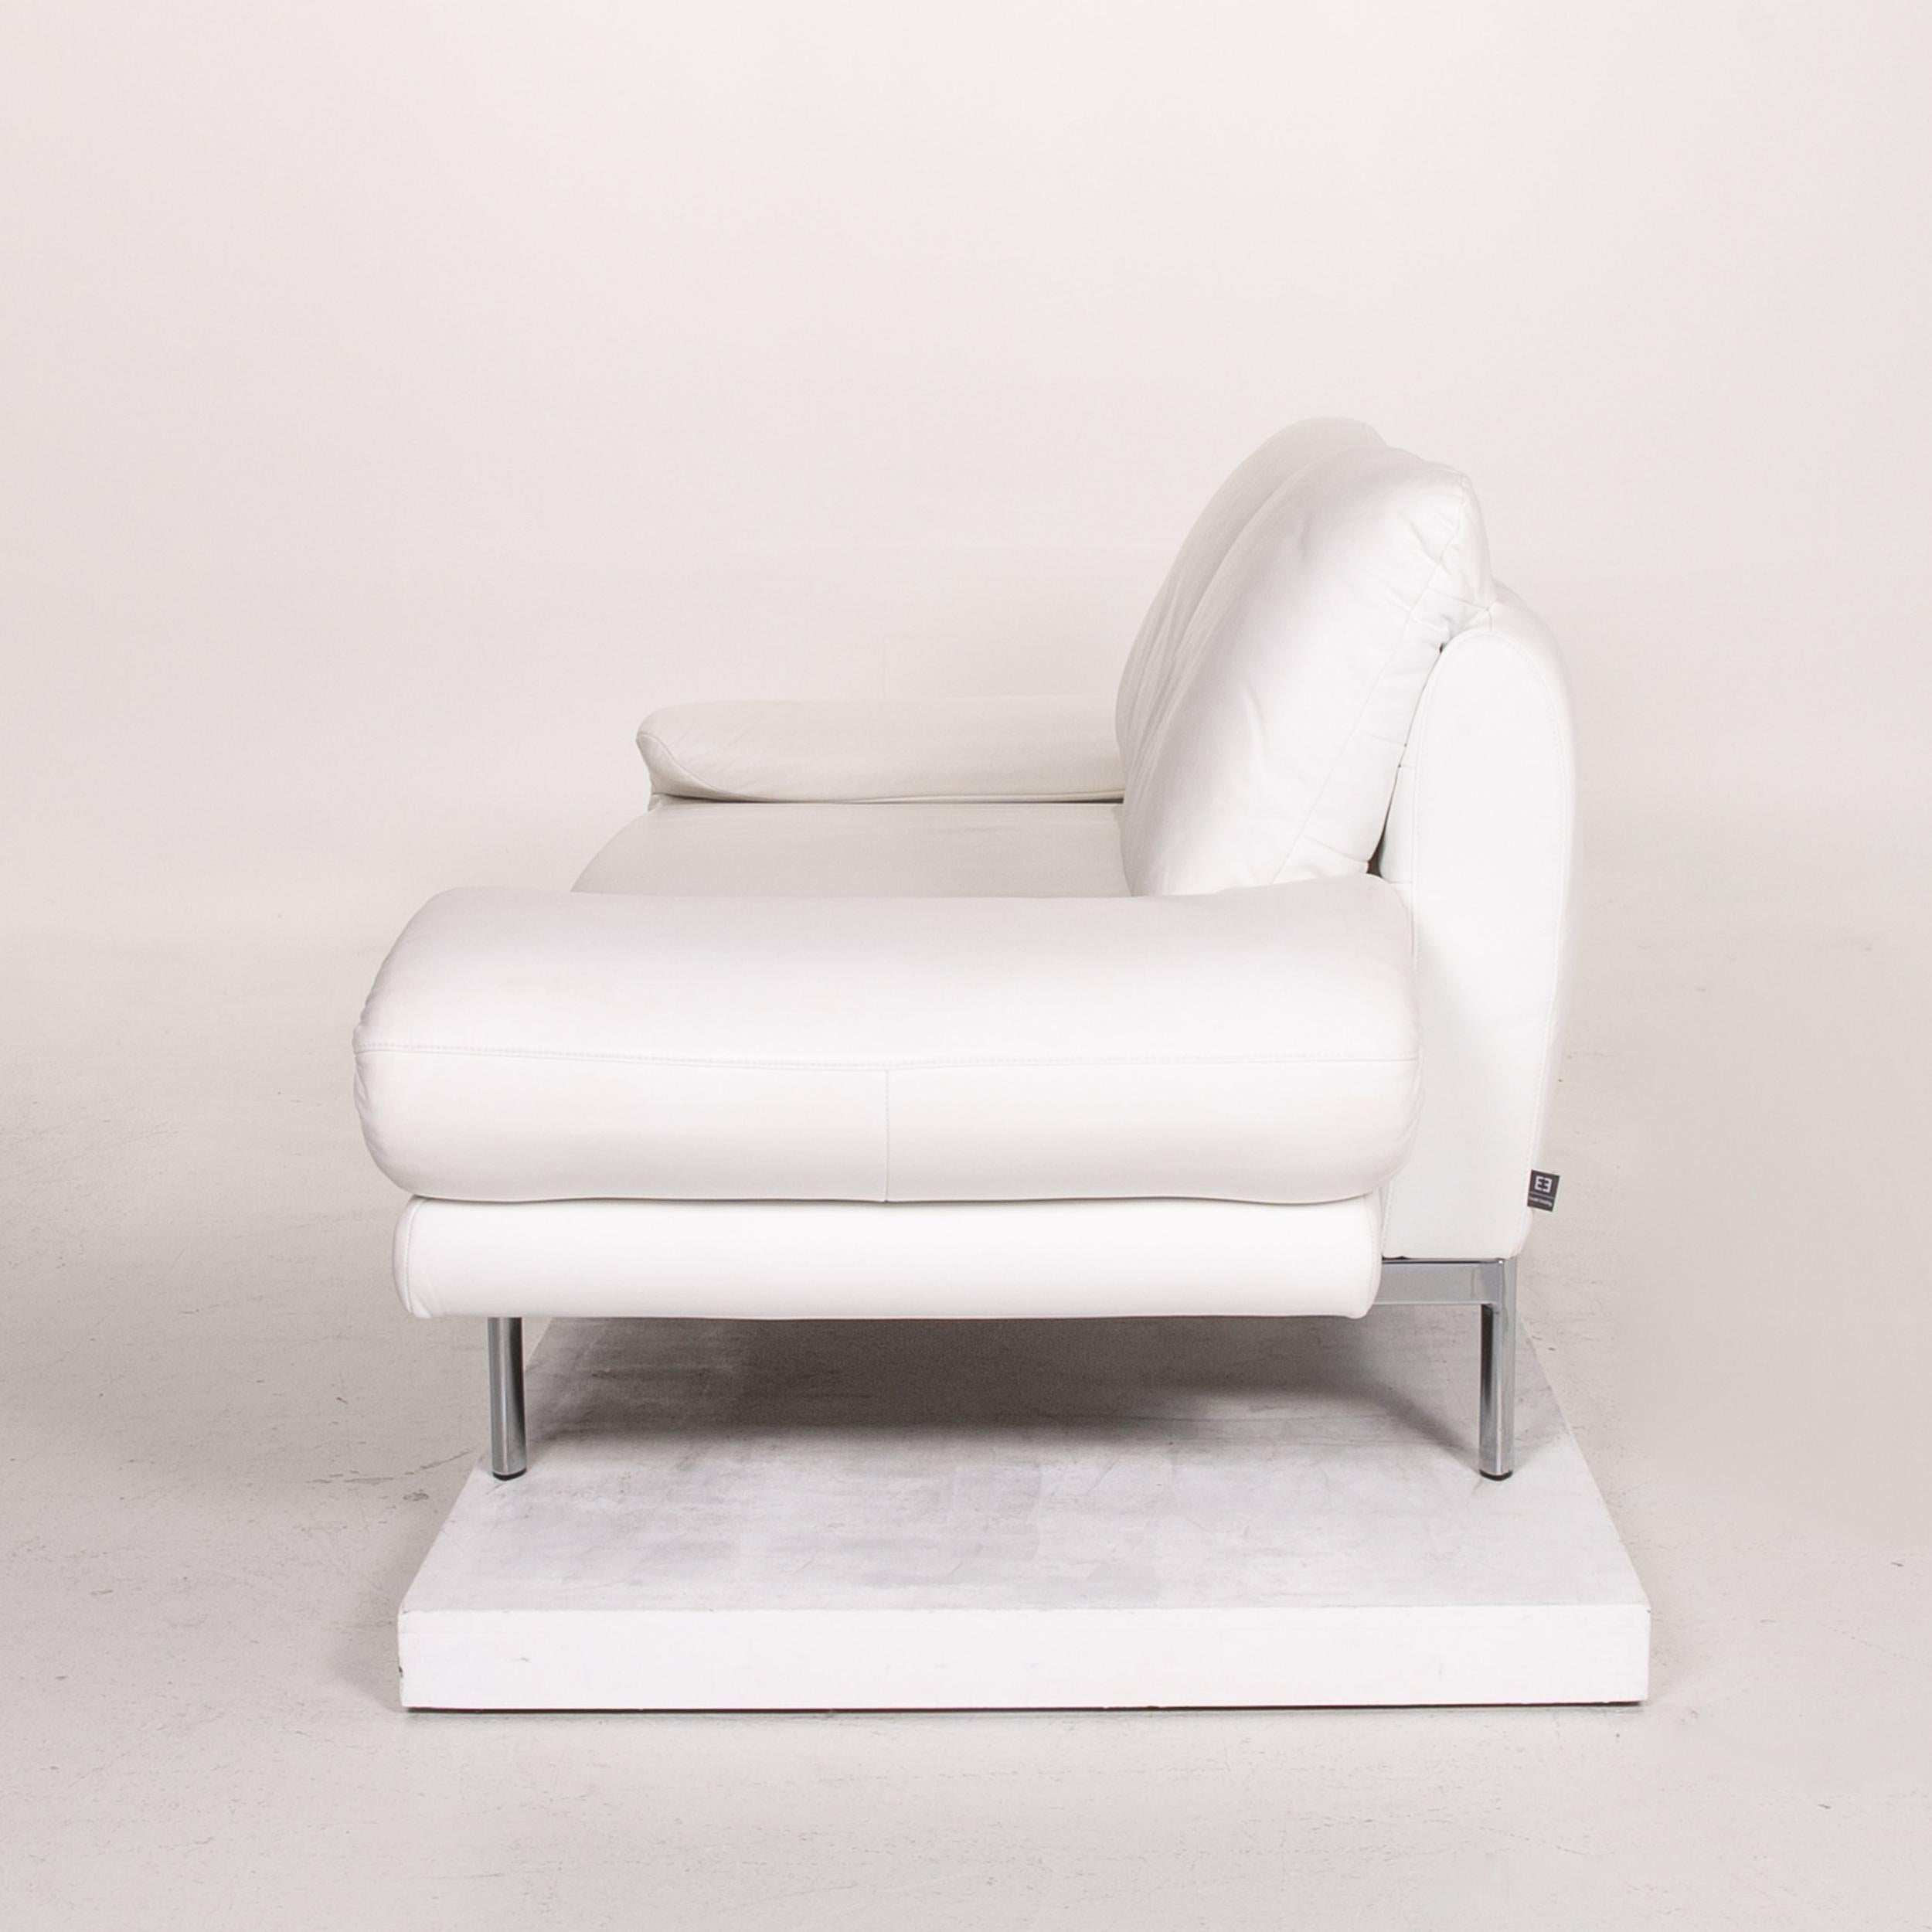 Ewald Schillig Quinn Leather Sofa White Second Function Relax Position Couch 8